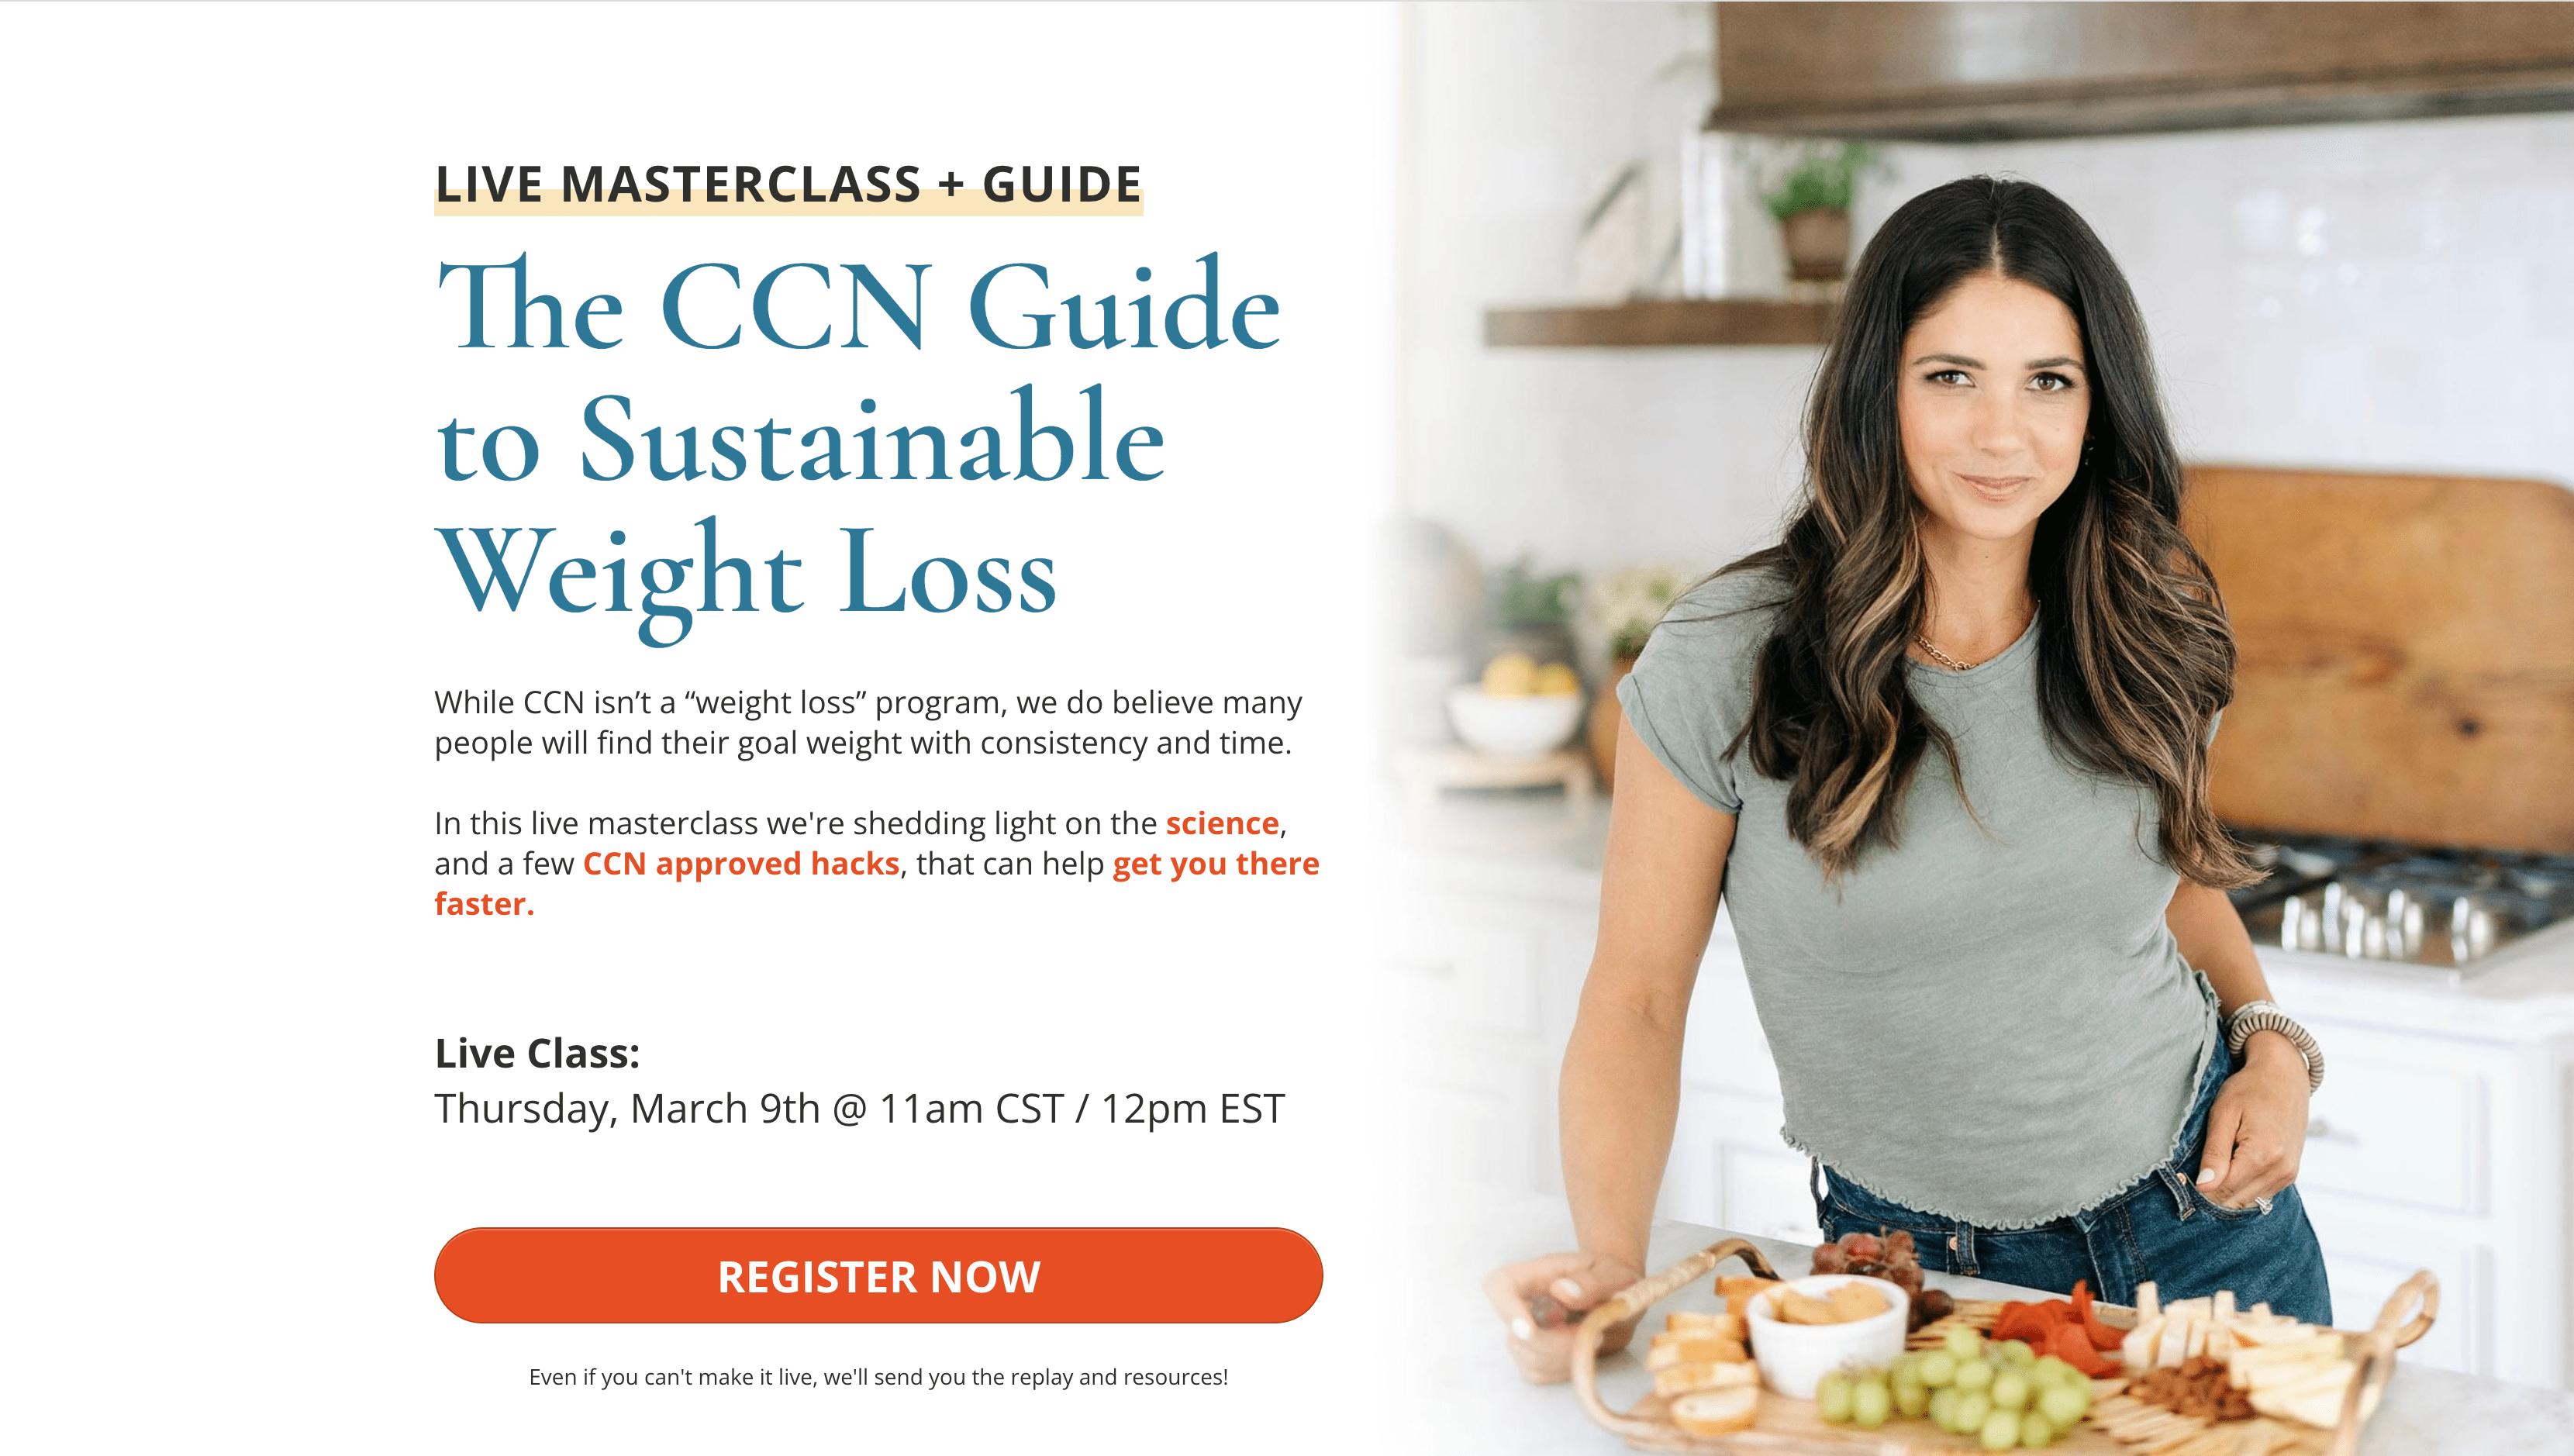 The CCN Guide to Sustainable Weight Loss